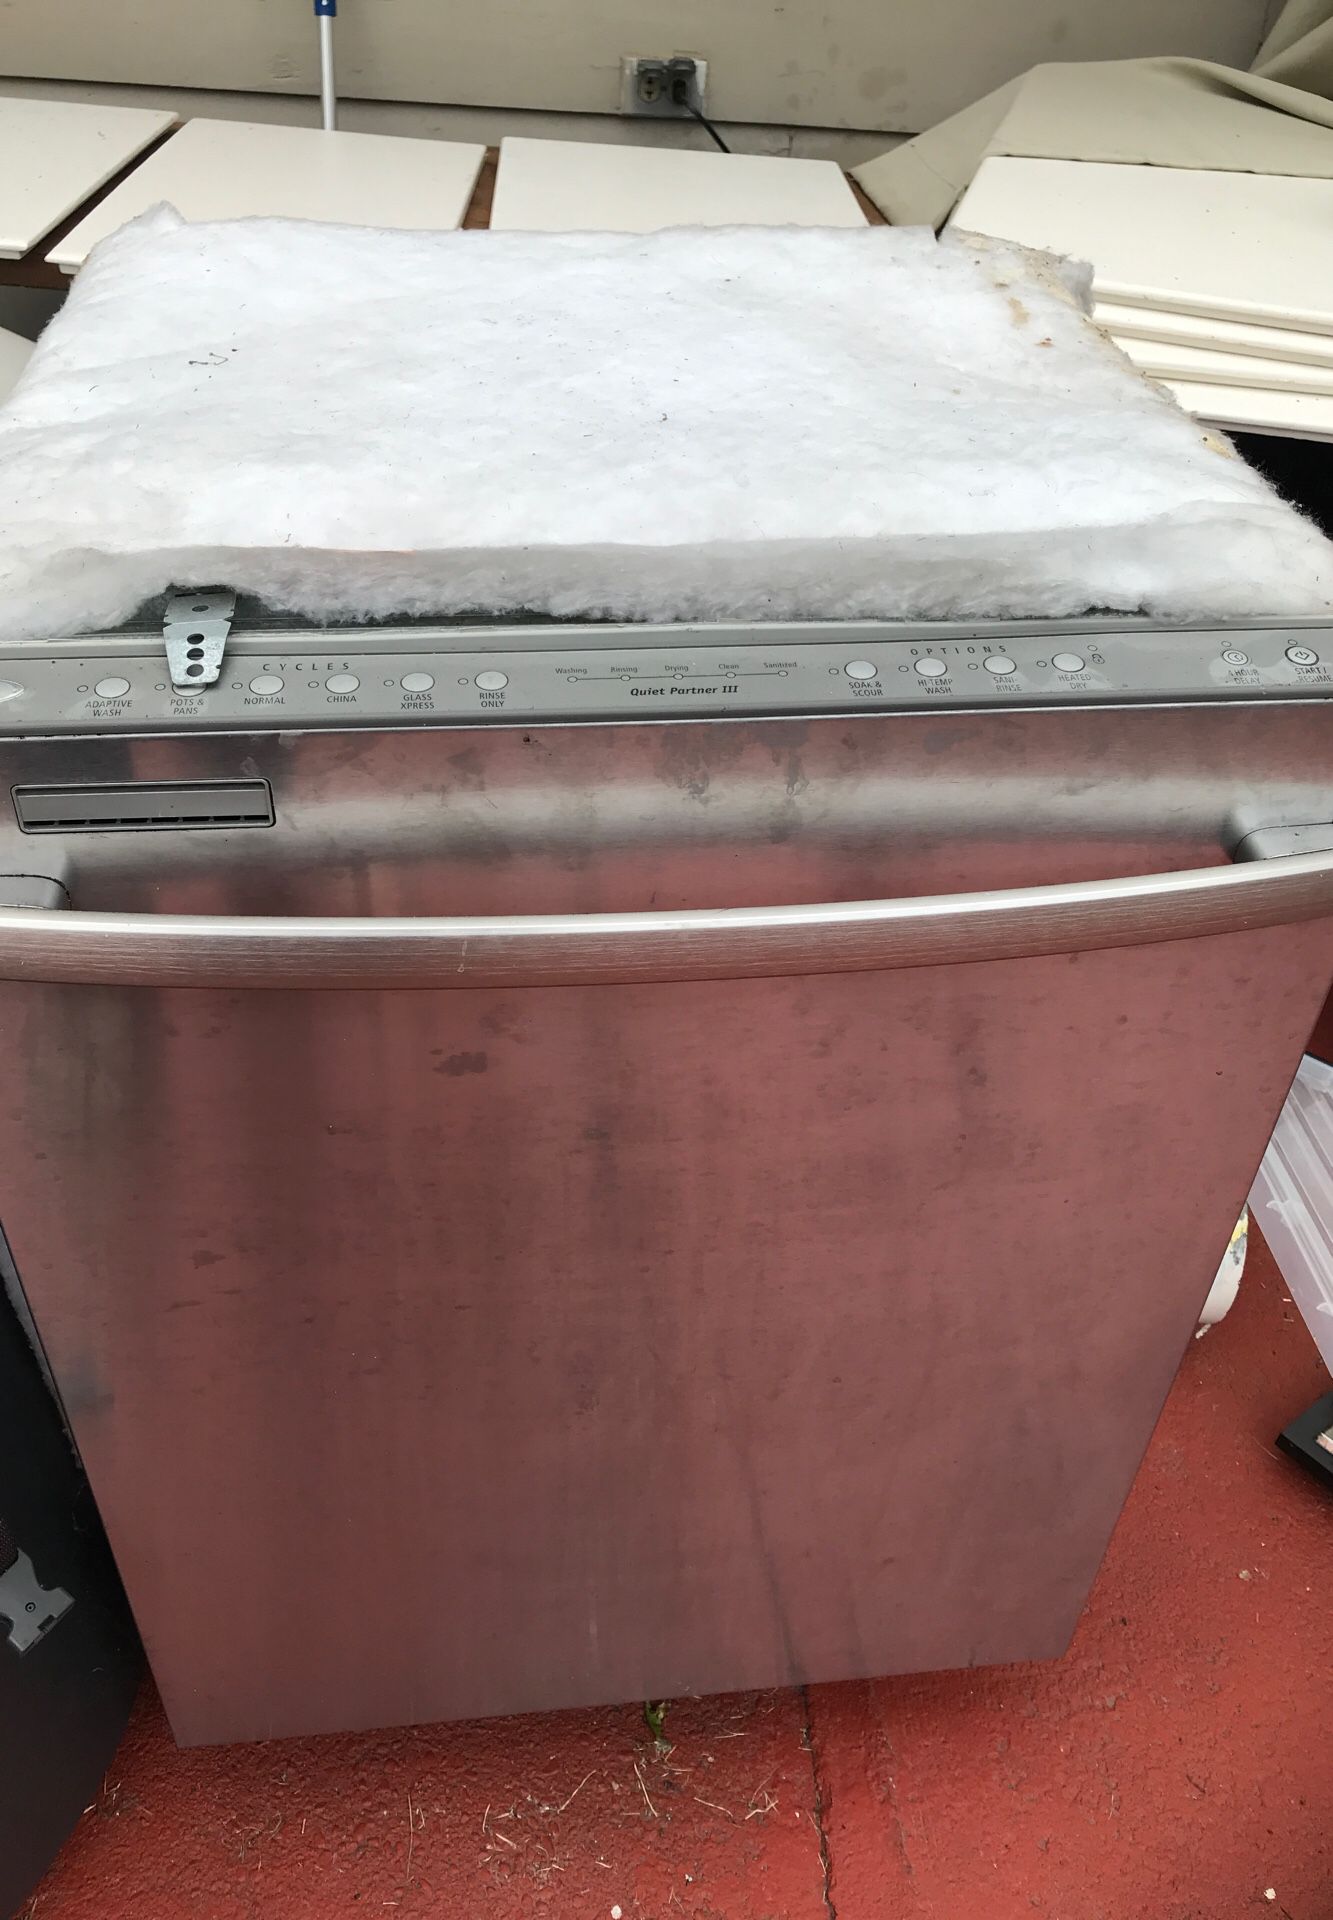 FREE Whirlpool Gold dishwasher (parts only)